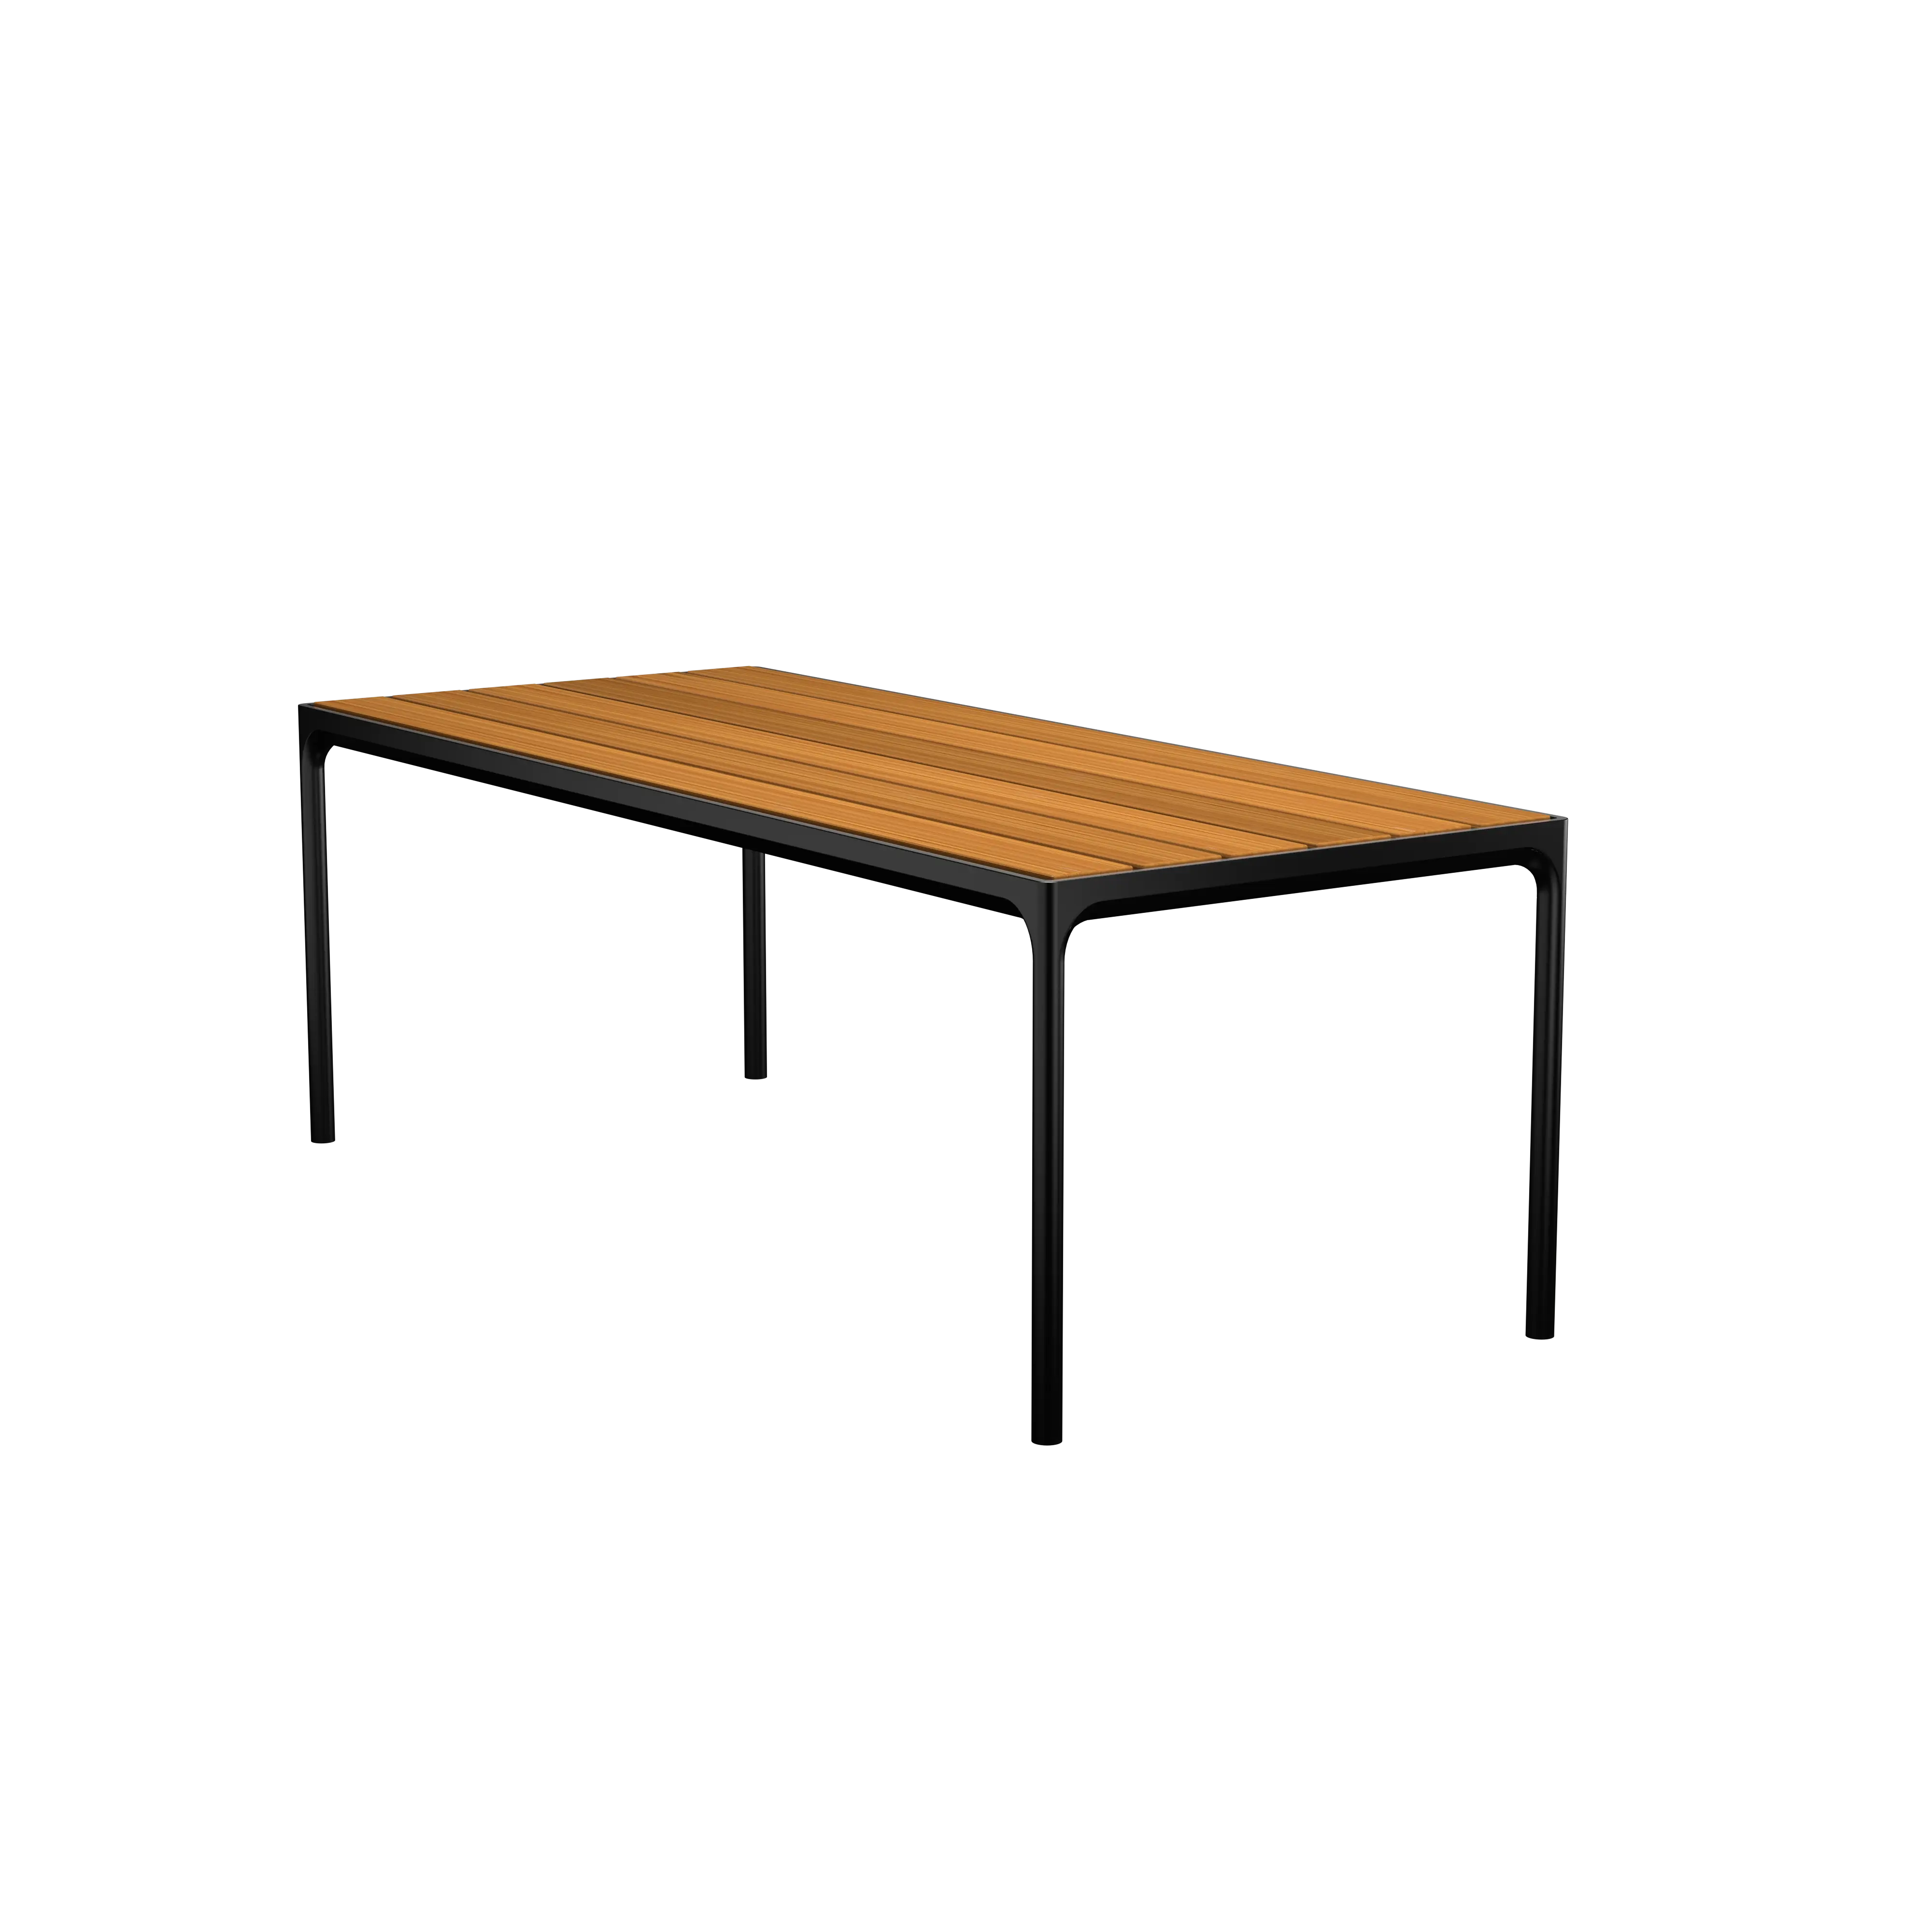 Four dining table 90 x 210 cm - Bamboo, black